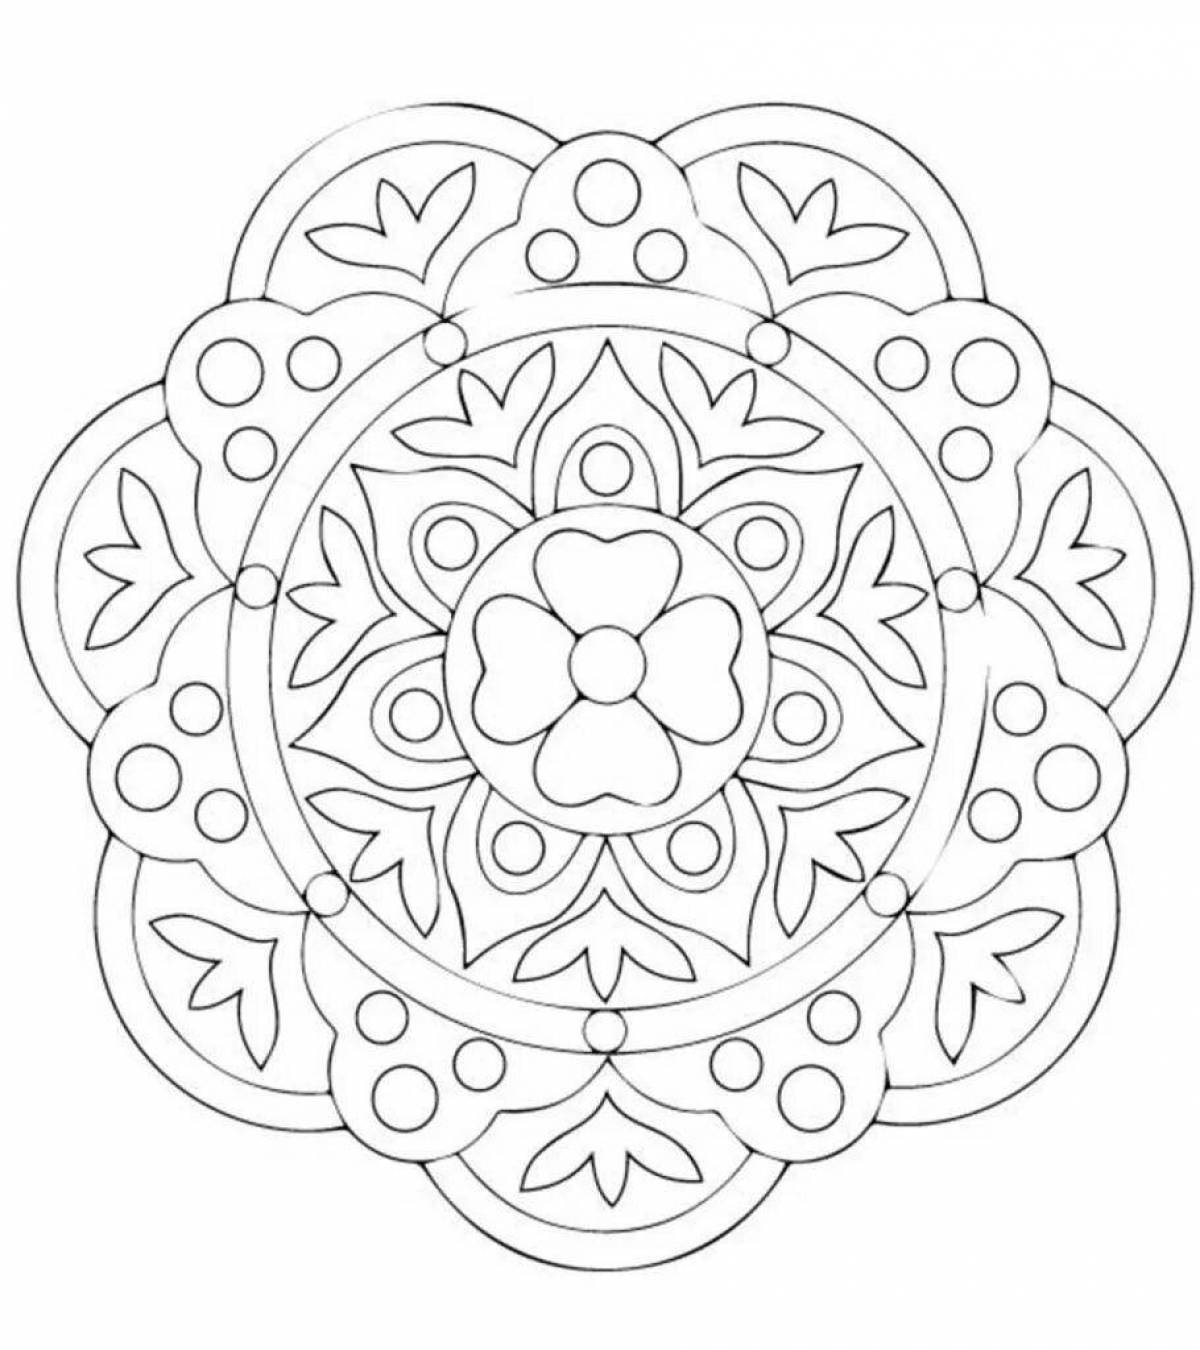 Coloring book exquisite tatar patterns